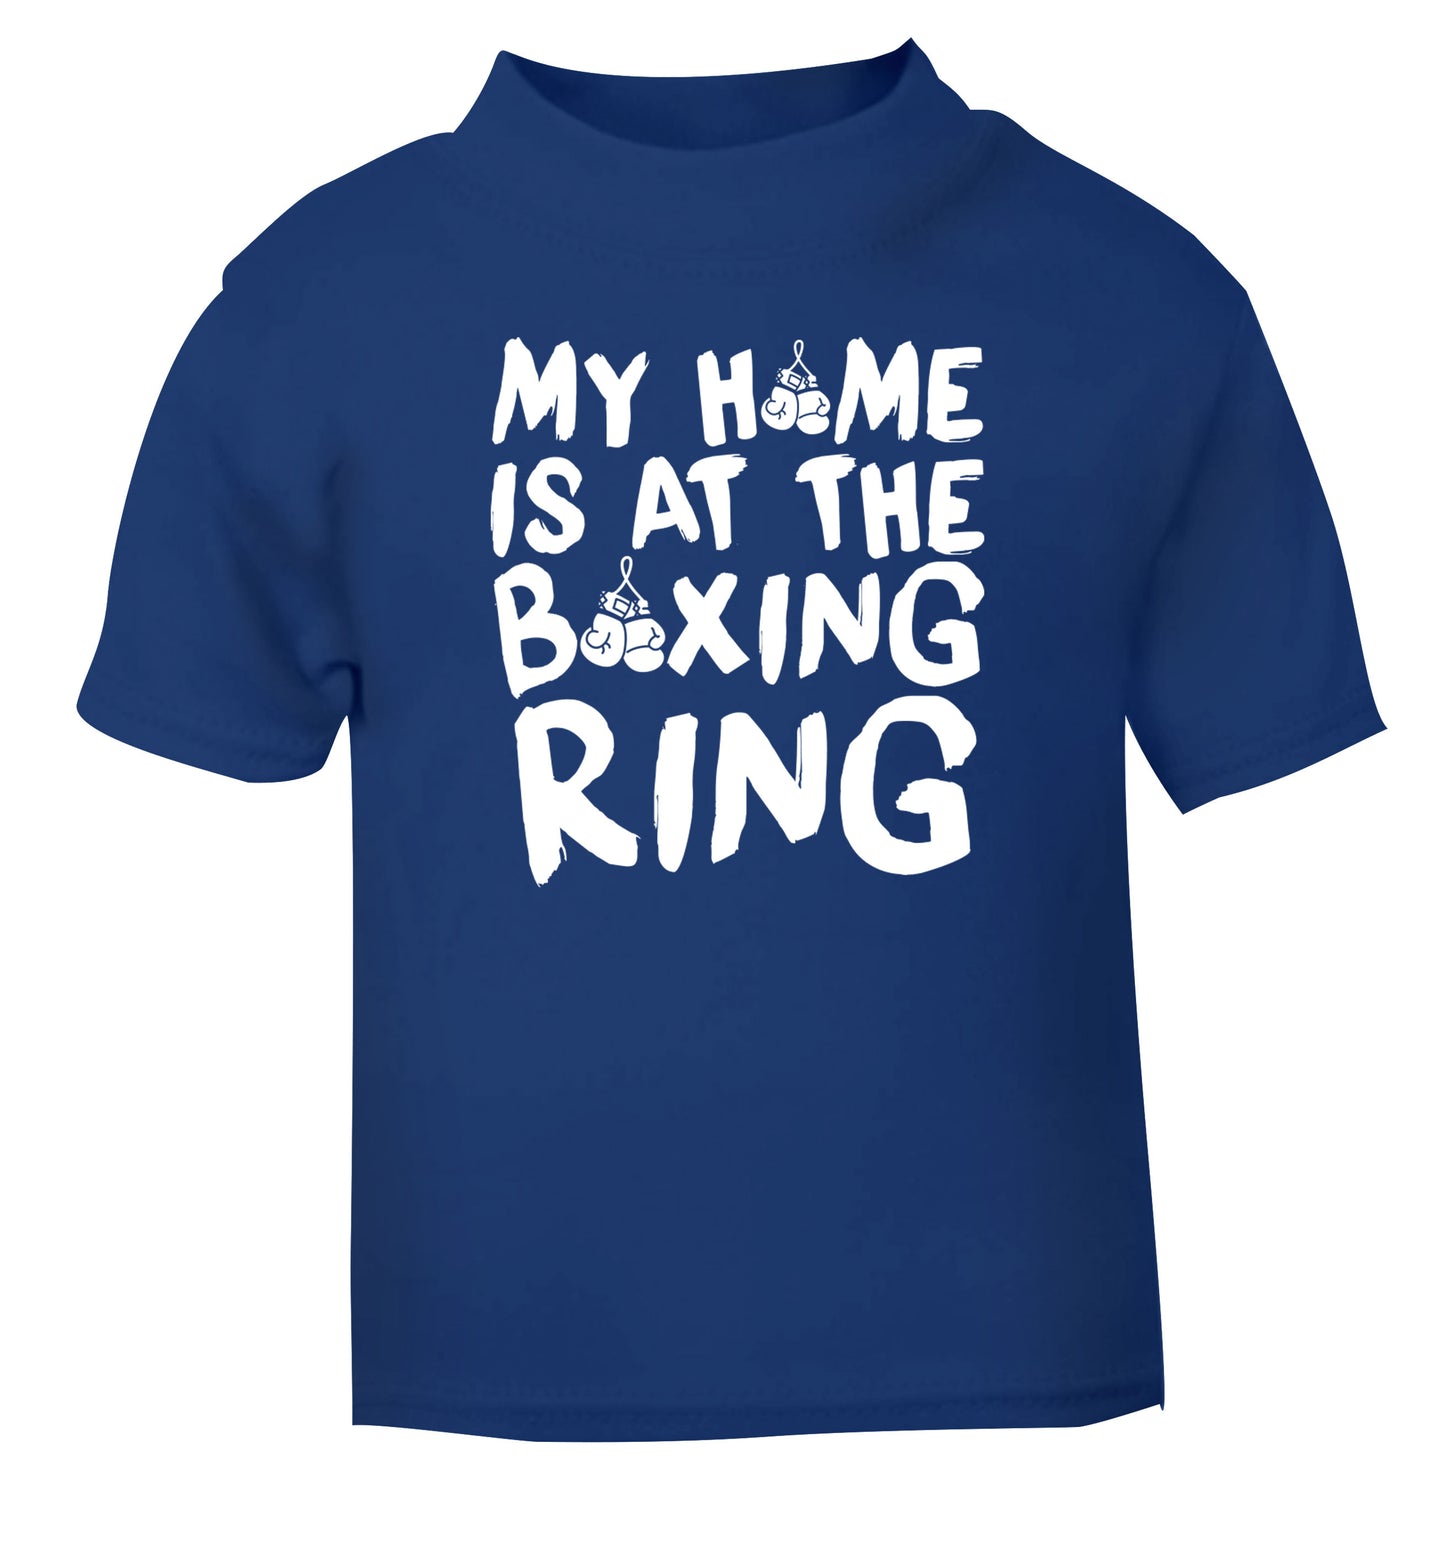 My home is at the boxing ring blue Baby Toddler Tshirt 2 Years